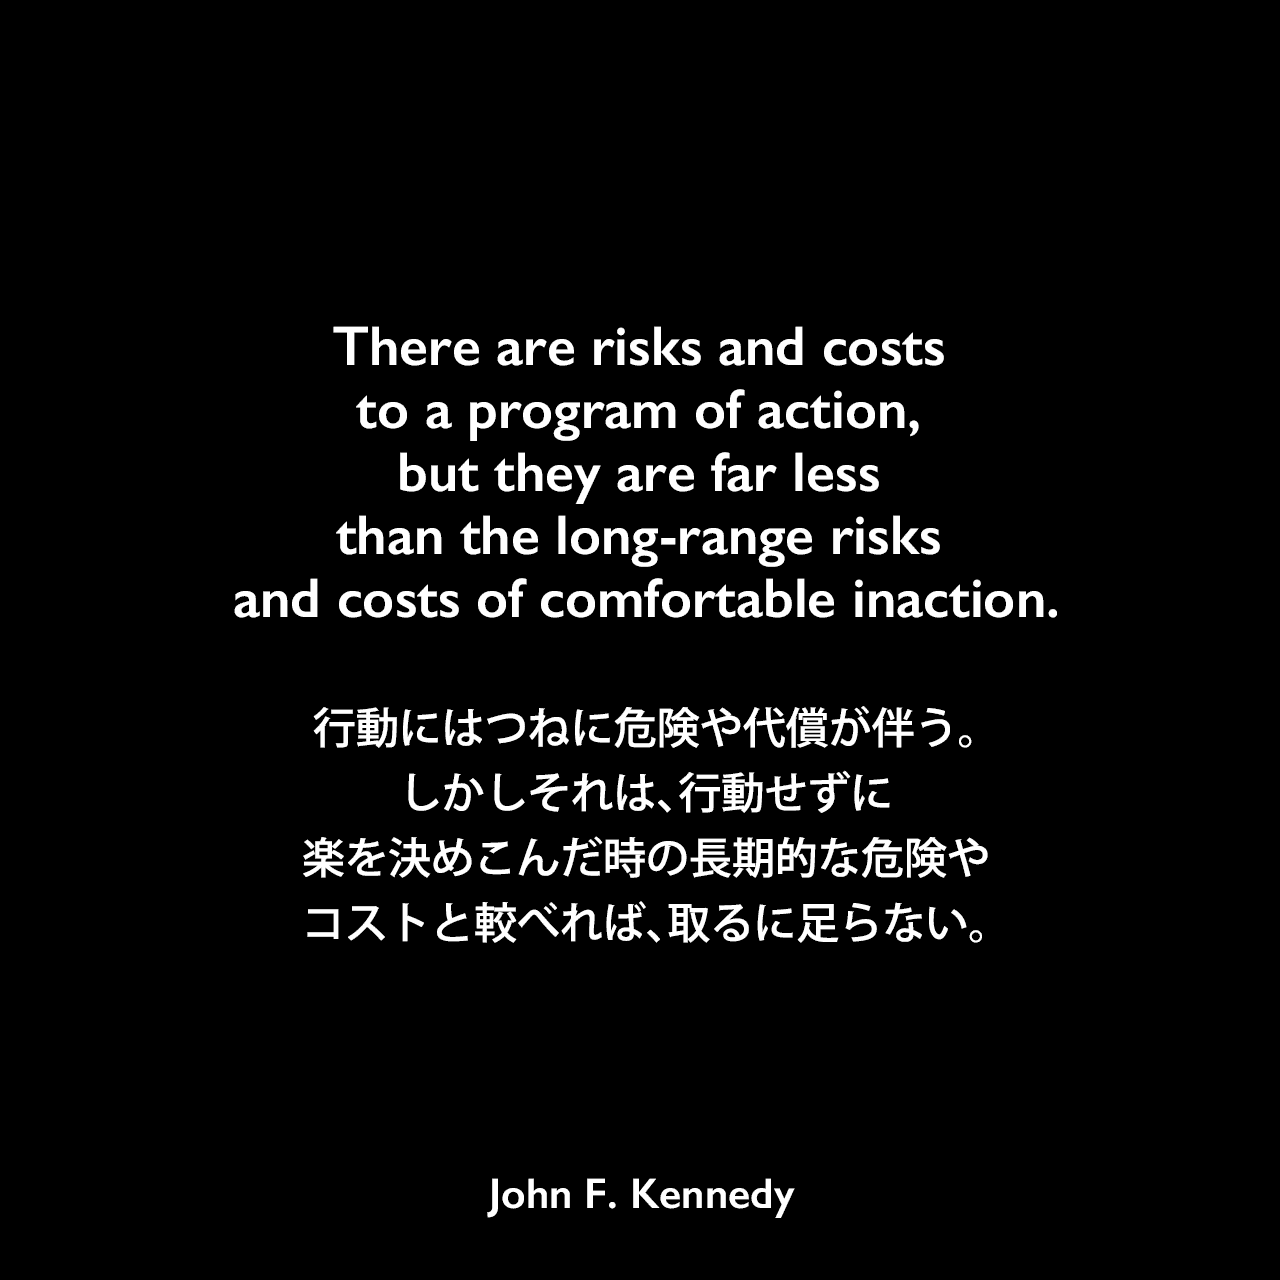 There are risks and costs to a program of action, but they are far less than the long-range risks and costs of comfortable inaction.行動にはつねに危険や代償が伴う。しかしそれは、行動せずに楽を決めこんだ時の長期的な危険やコストと較べれば、取るに足らない。